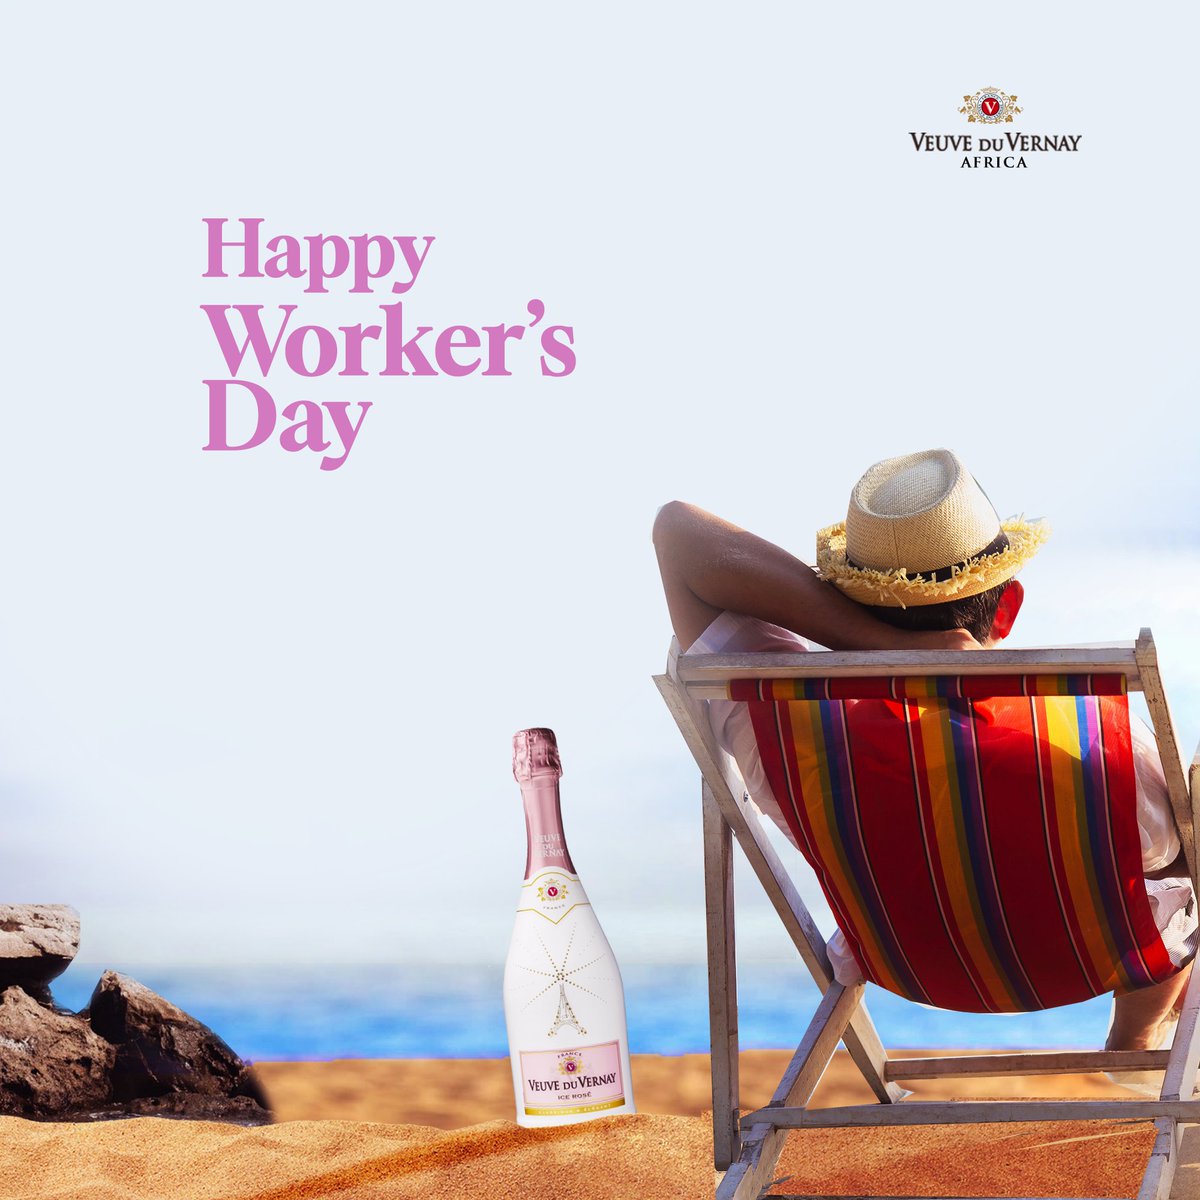 Happy Worker's Day to all the incredible people who make the world go round! 
Here's to your hard work, dedication, and passion.

#HappyWorkersDay #VeuveDuVernay #ATasteOfFrance